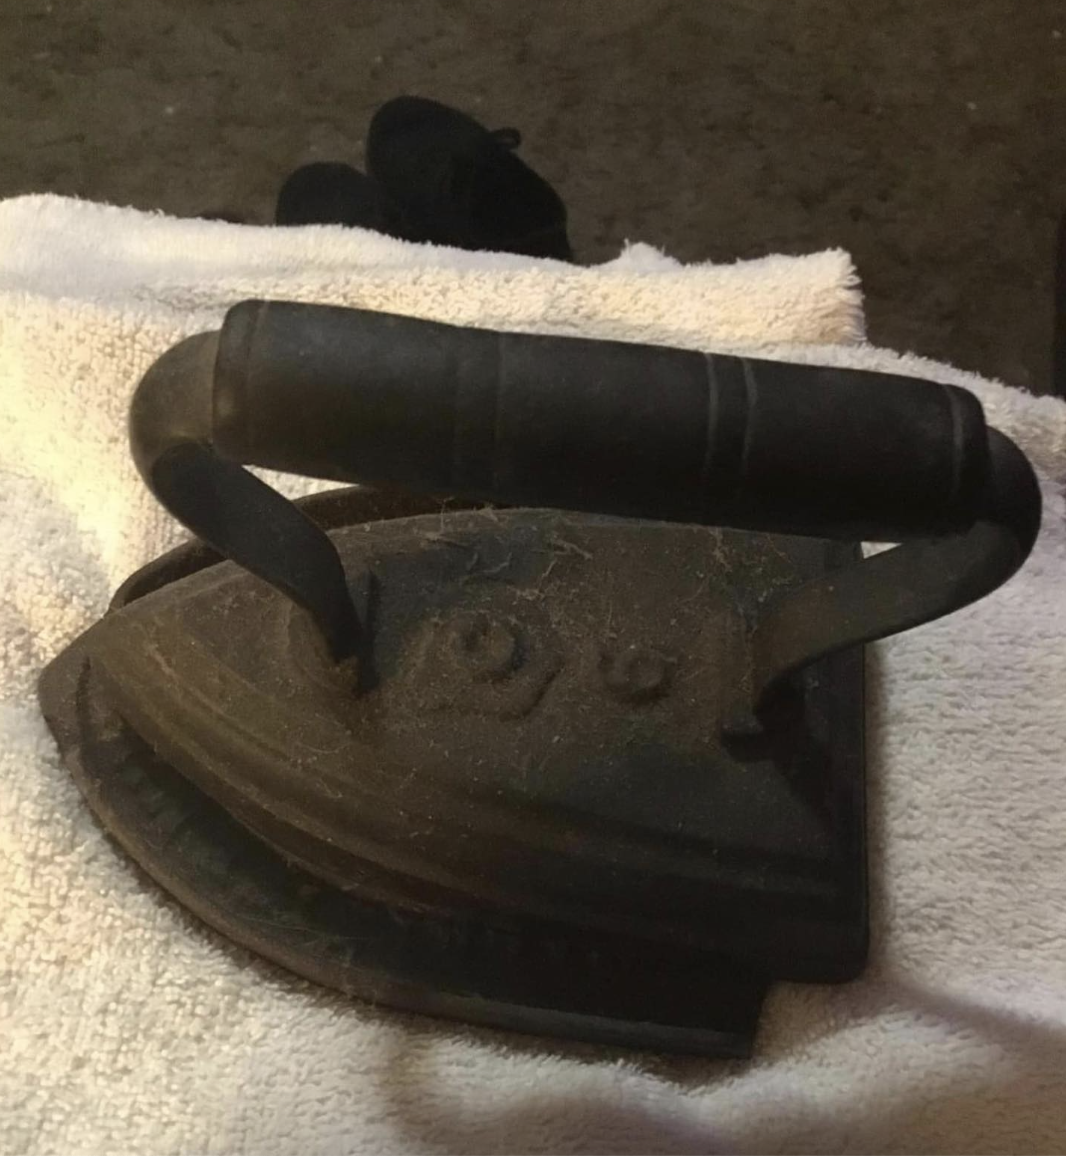 An antique cast-iron iron with large handle to be heated over fire